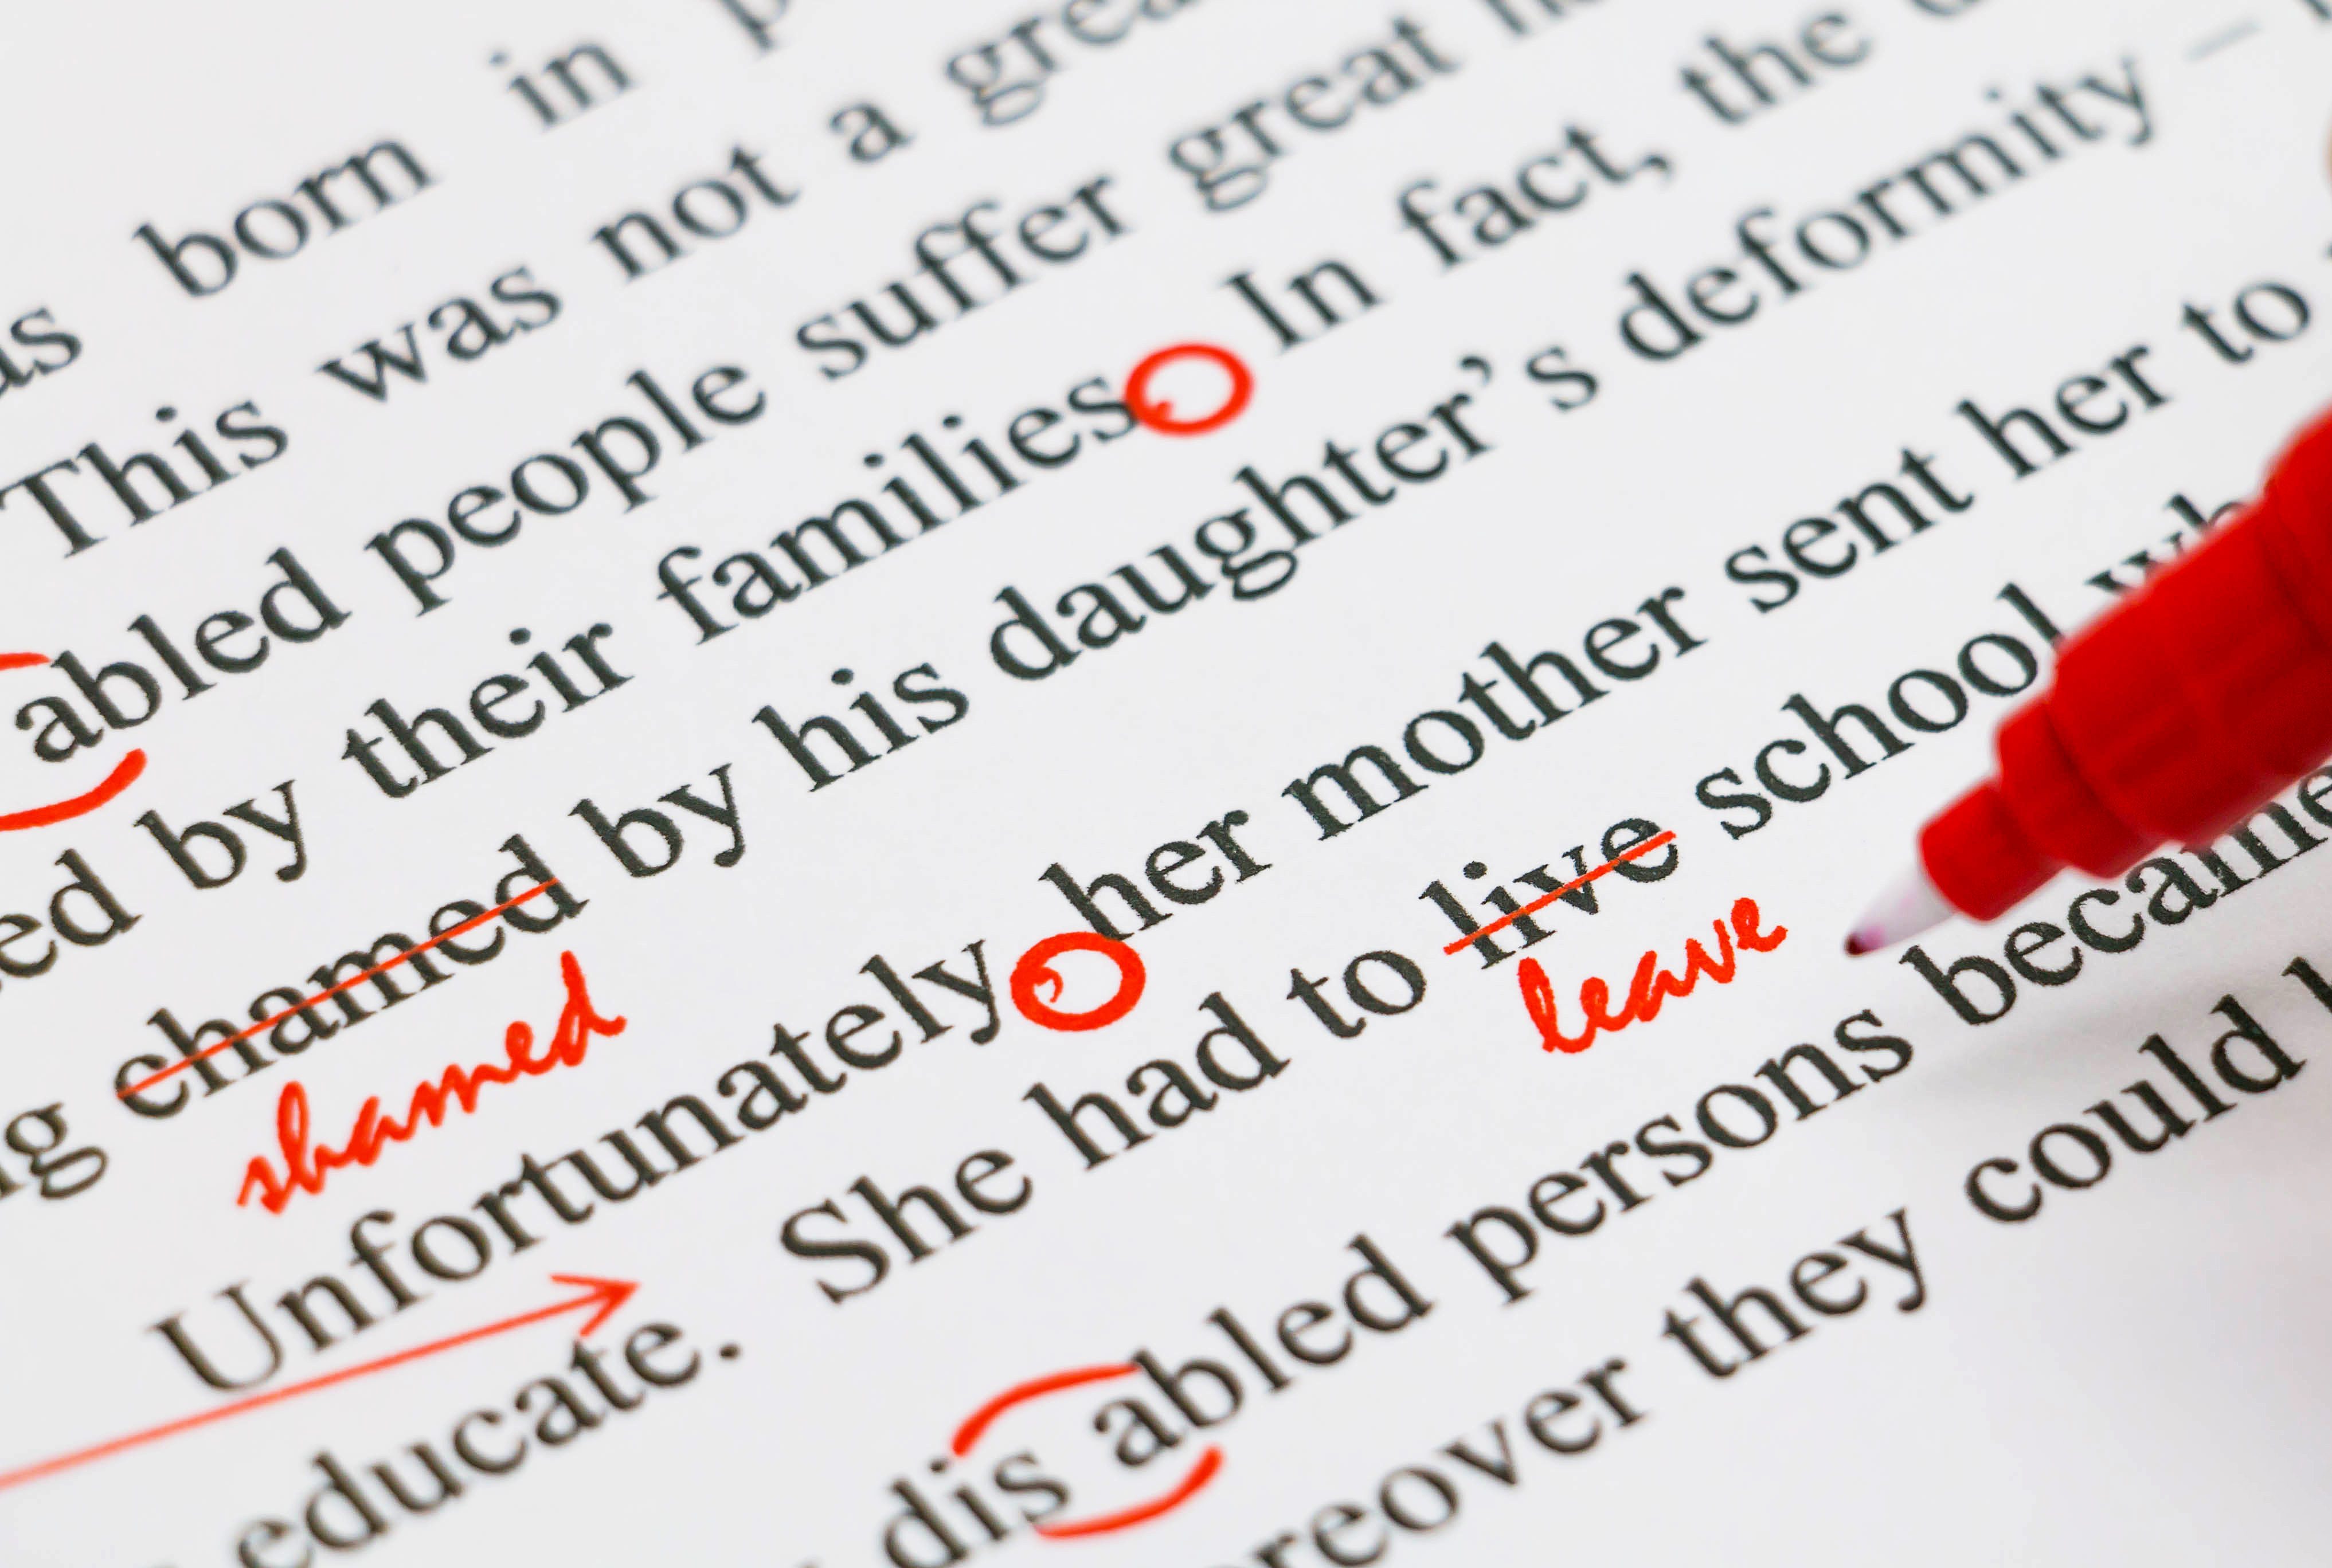 Free Online Proofreader: Grammar Check, Plagiarism Detection, and more